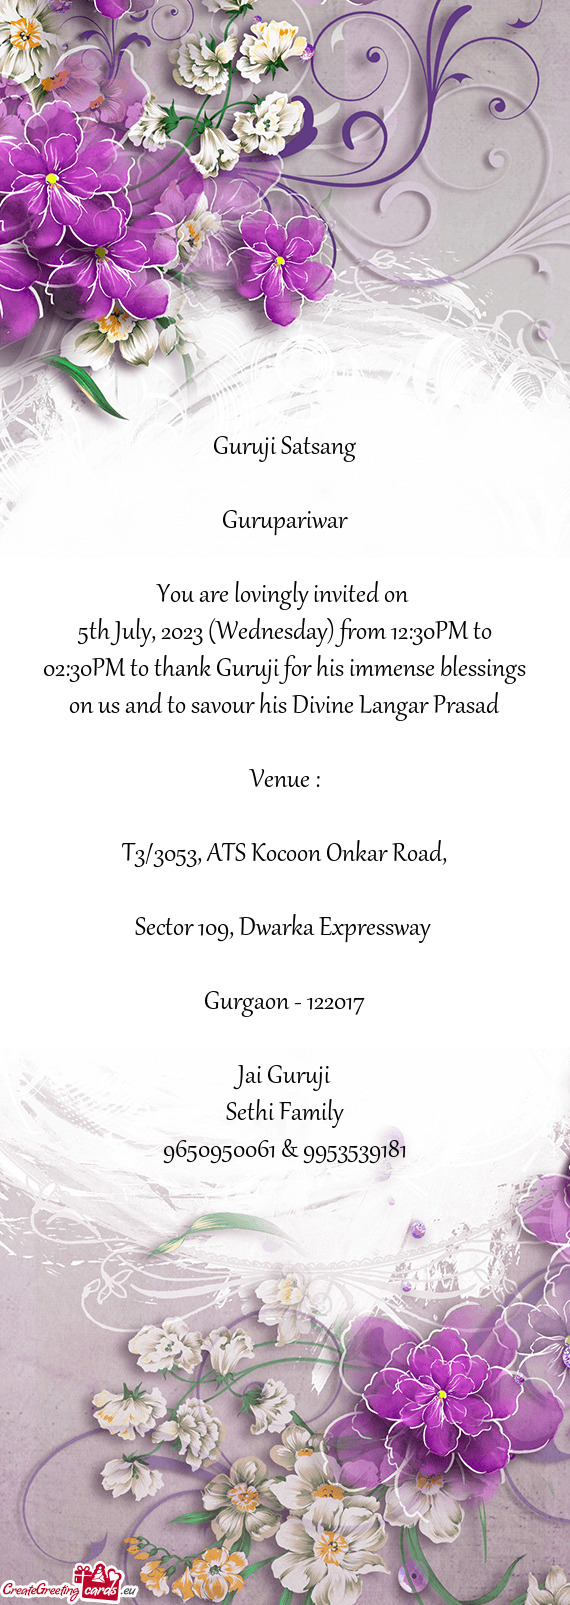 5th July, 2023 (Wednesday) from 12:30PM to 02:30PM to thank Guruji for his immense blessings on us a